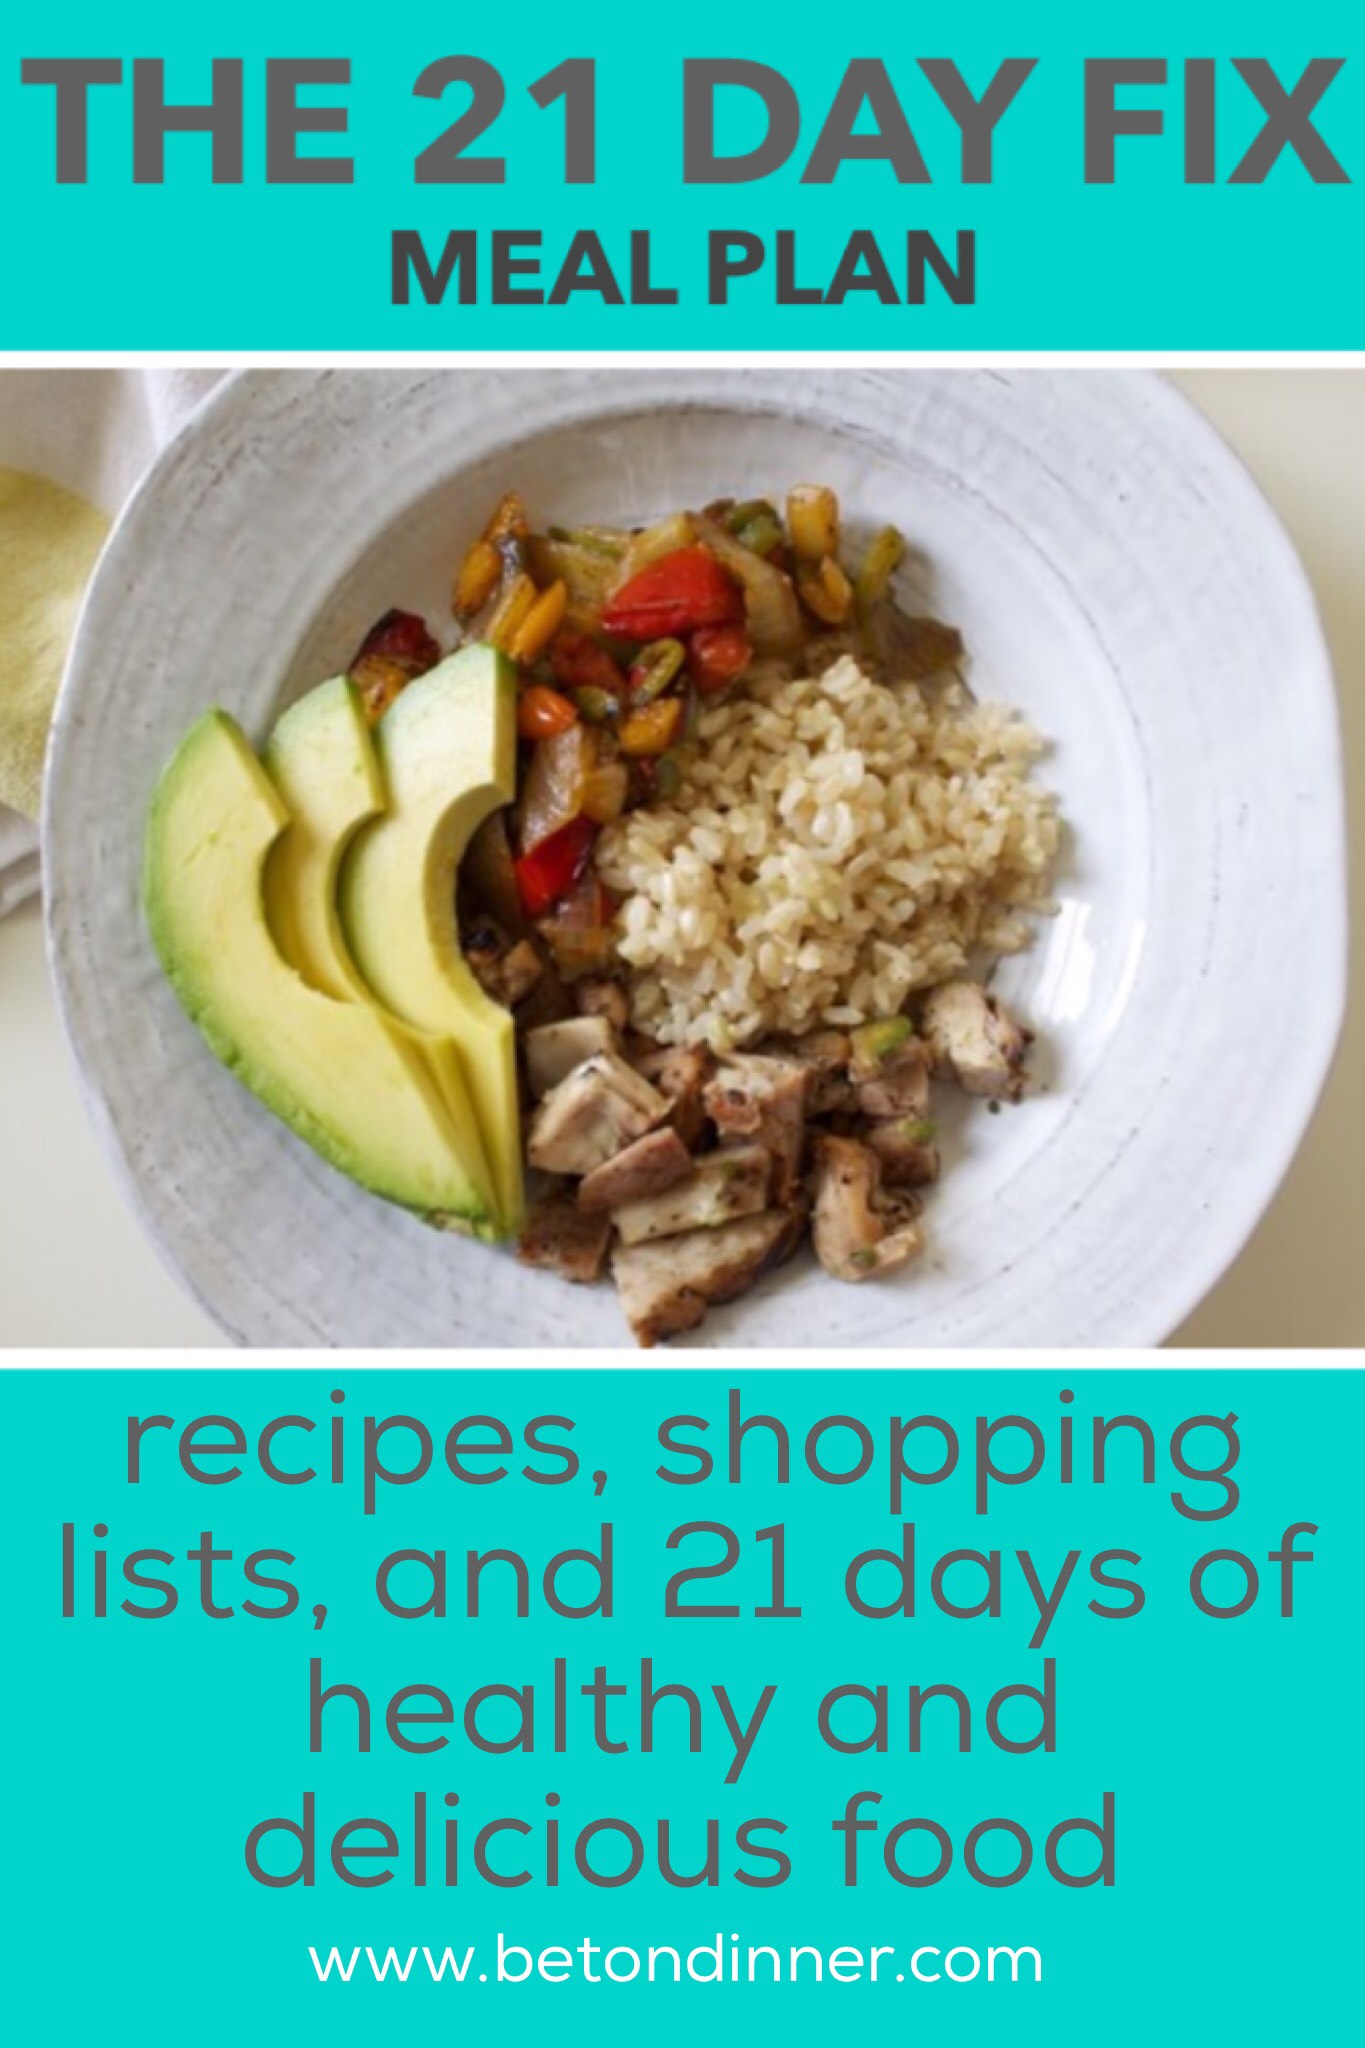 Download a complete 21 Day Fix meal plan with shopping lists, recipes, and healthy and delicious food you'll look forward to eating!